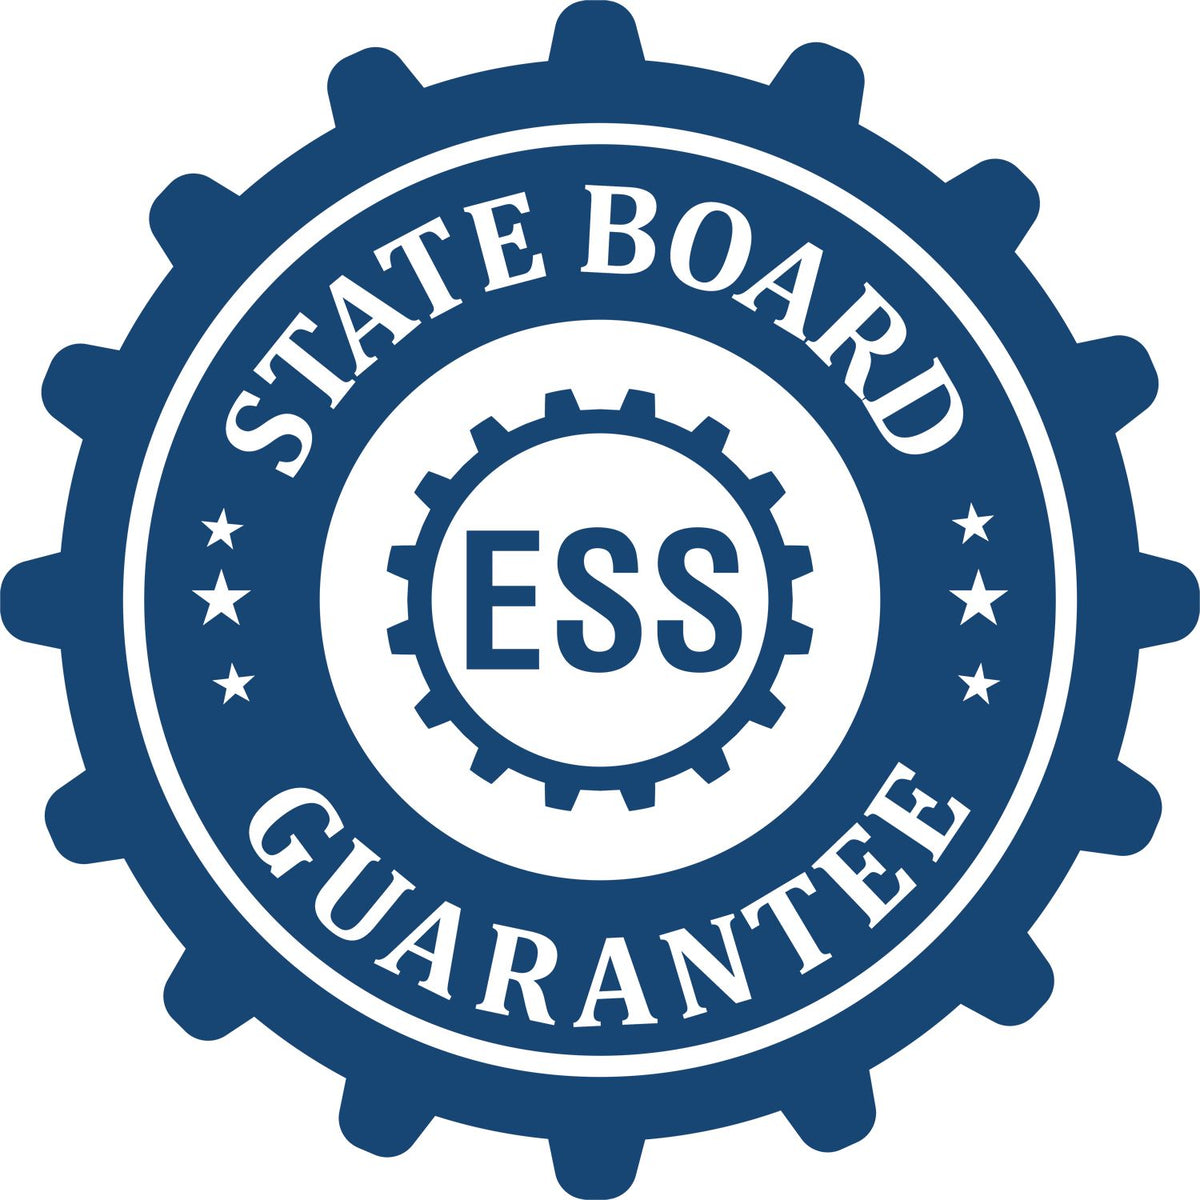 An emblem in a gear shape illustrating a state board guarantee for the Montana Professional Engineer Seal Stamp product.